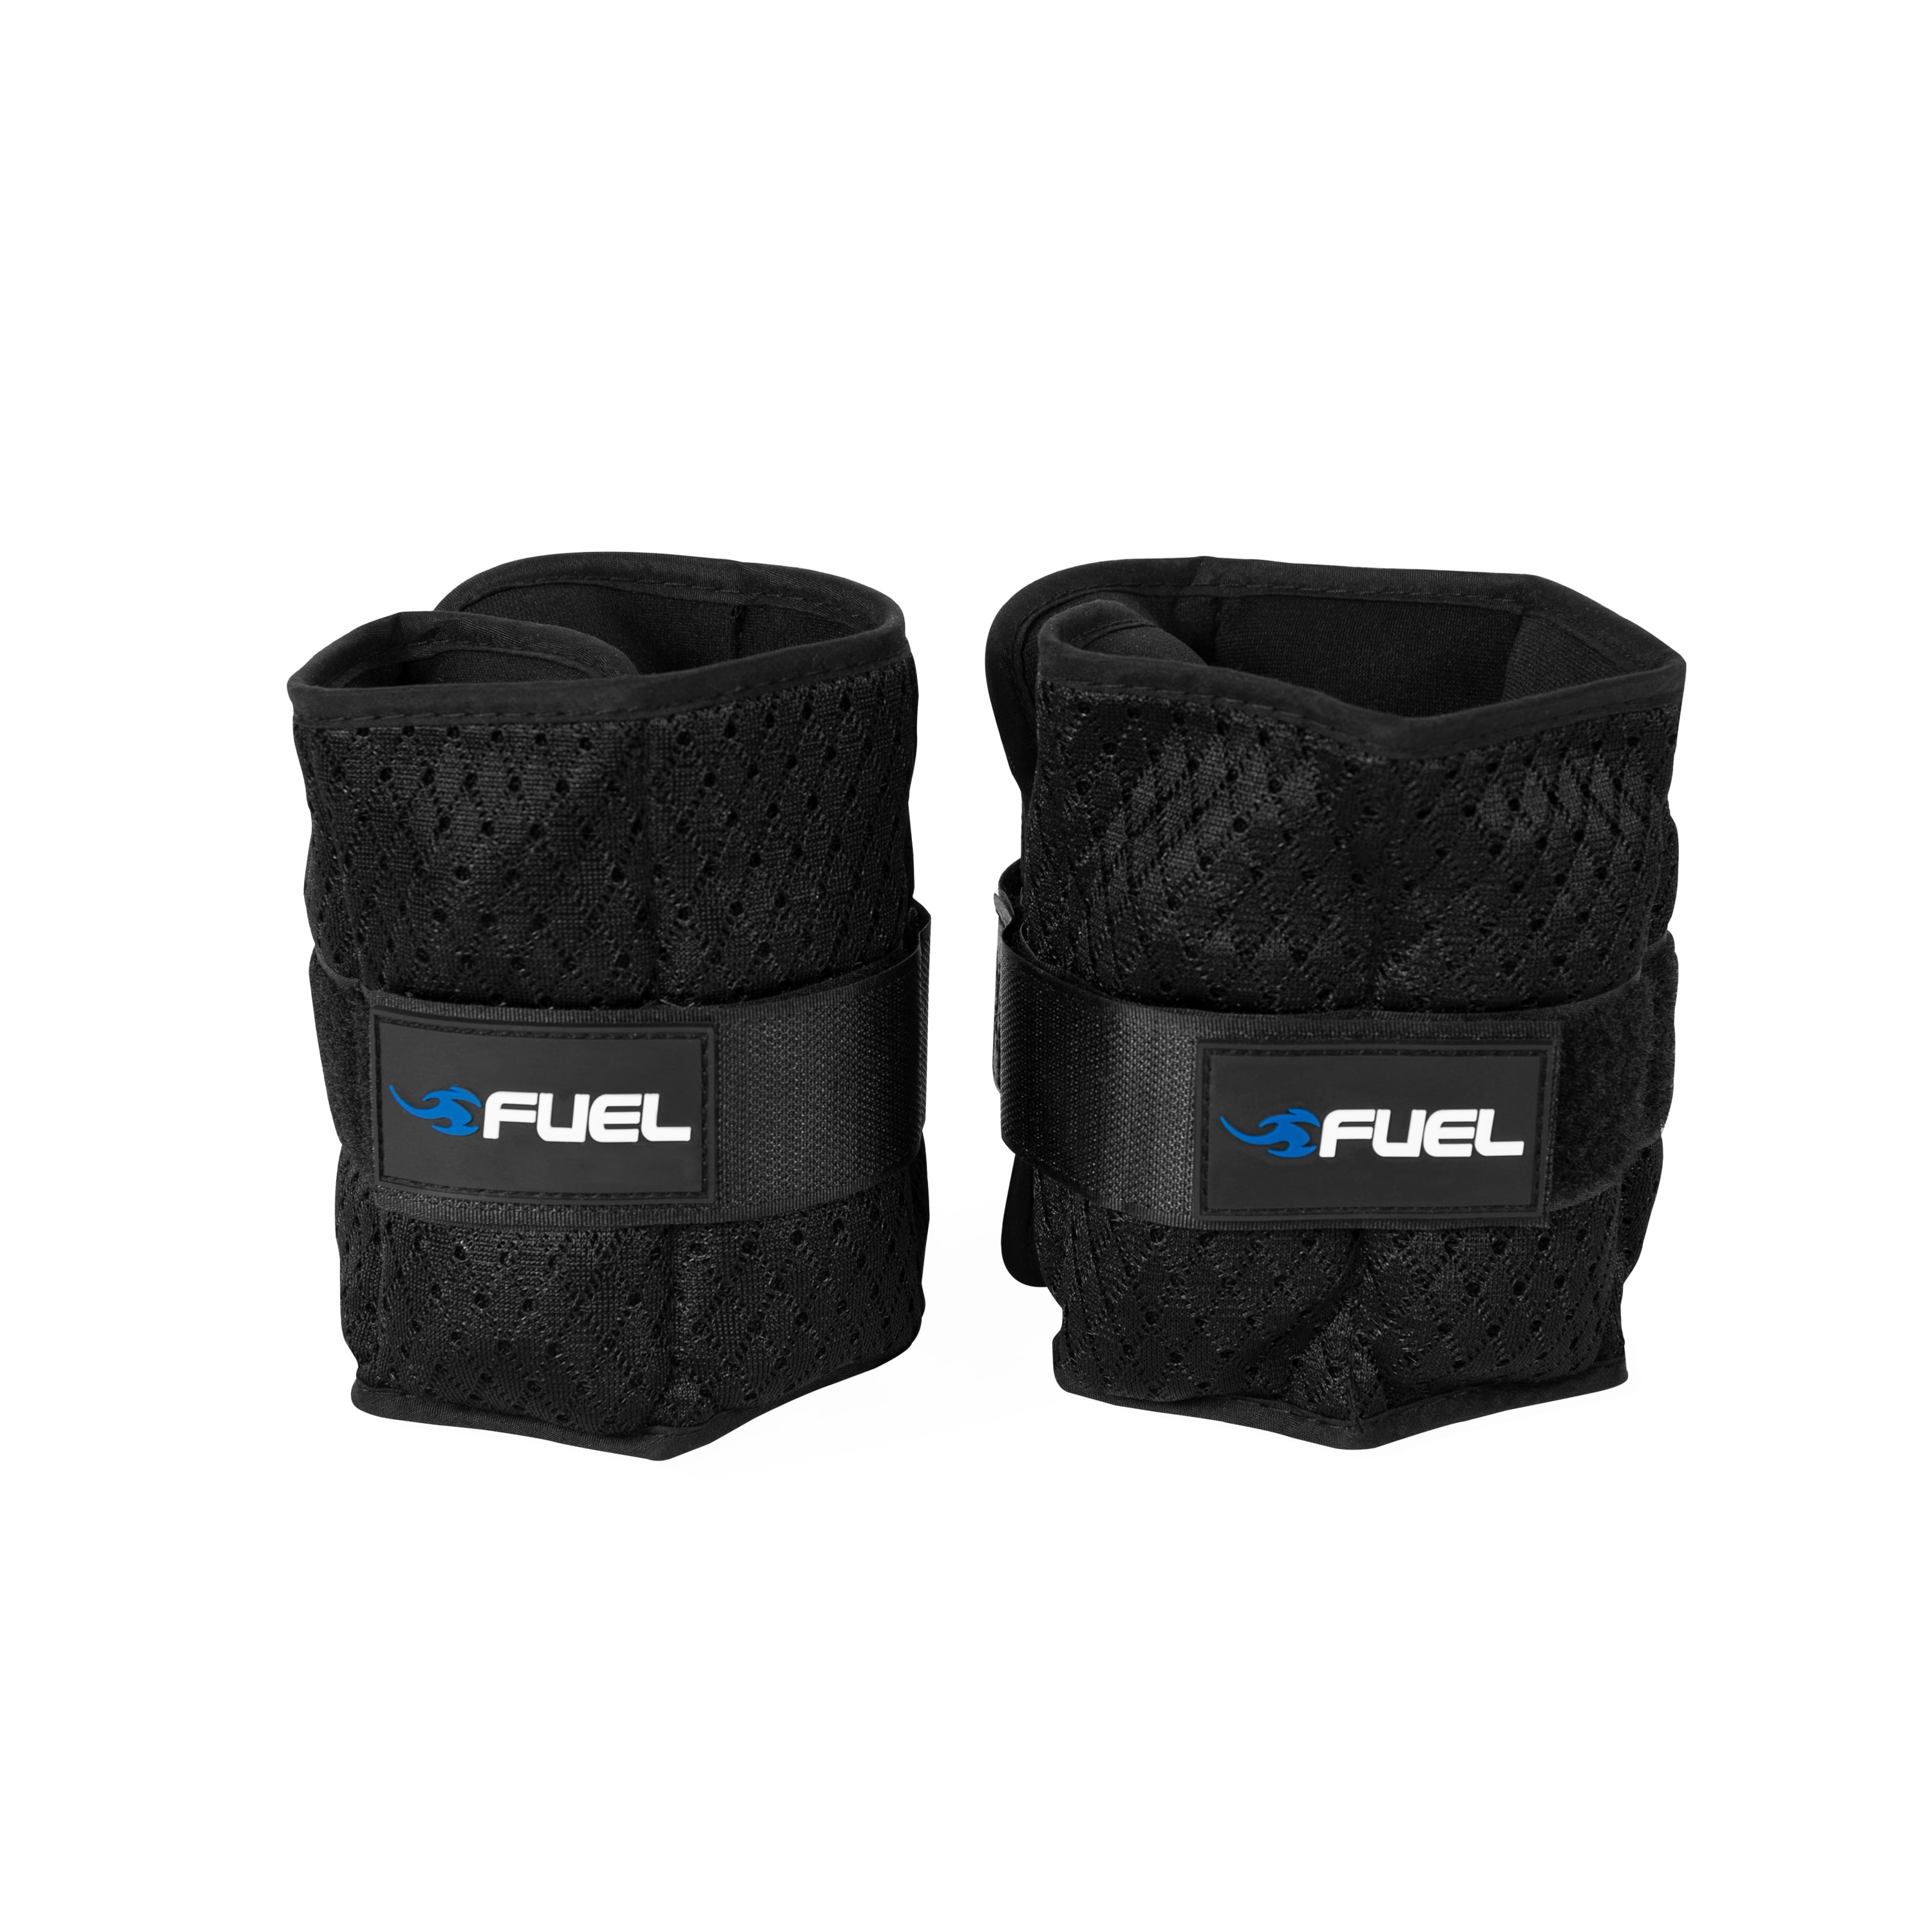 Fuel Pureformance Adjustable Wrist/Ankle Weights, 10-Pound Pair (20 lb  total)